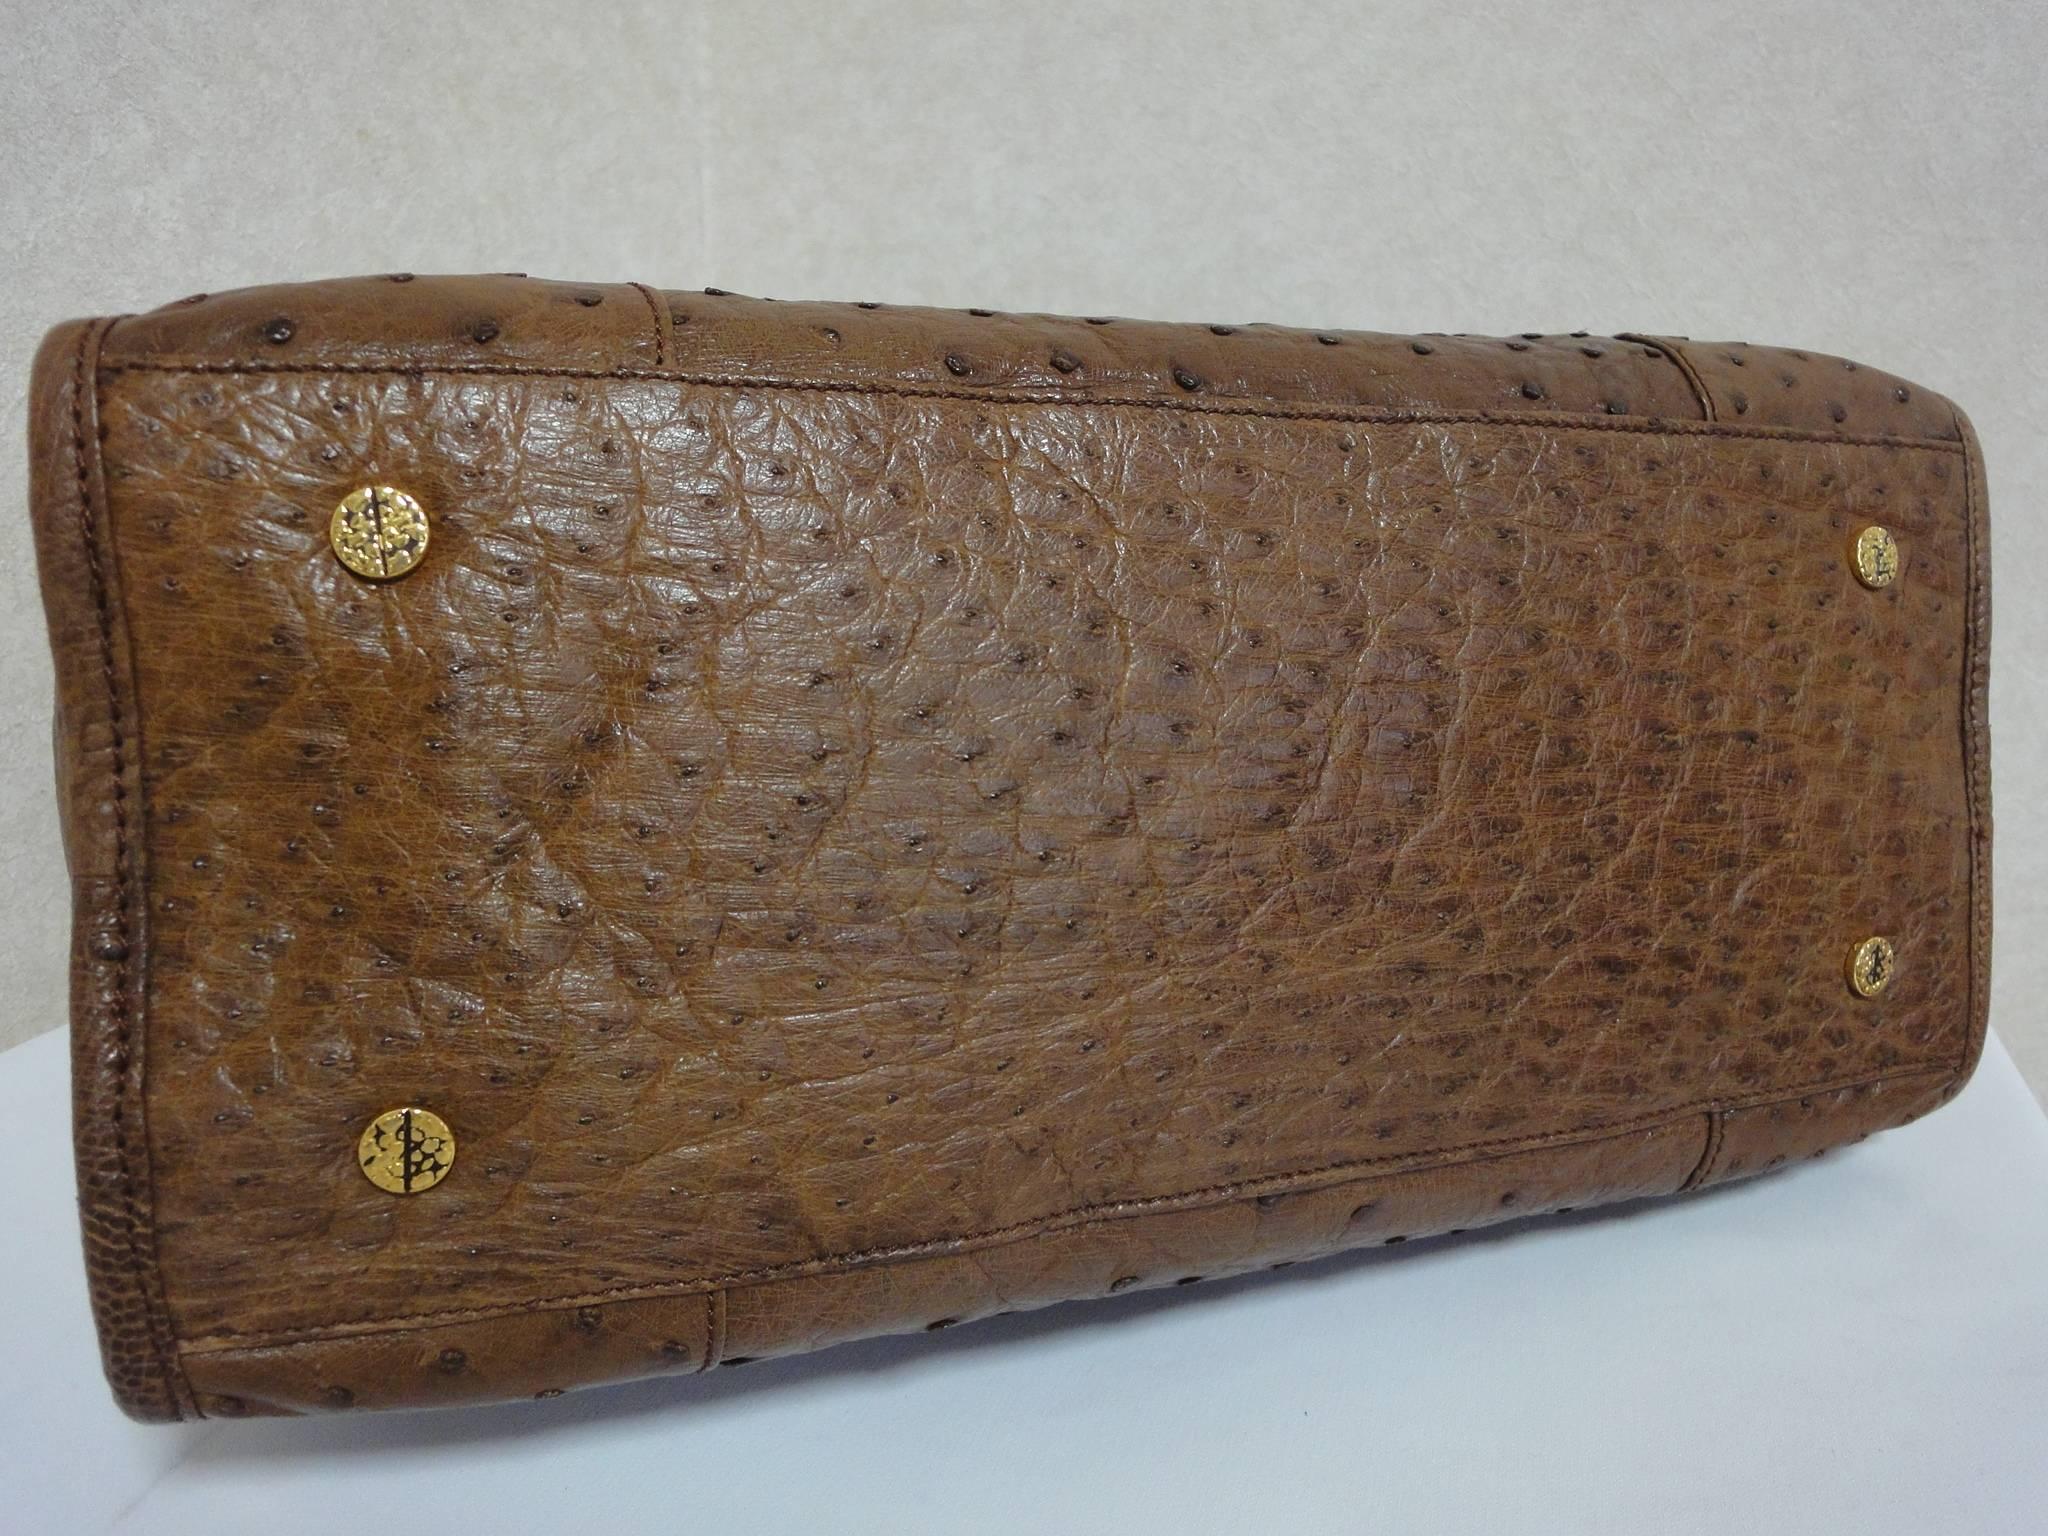 Vintage Borbonese by Red wall, genuine brown ostrich leather bag. Unisex 6